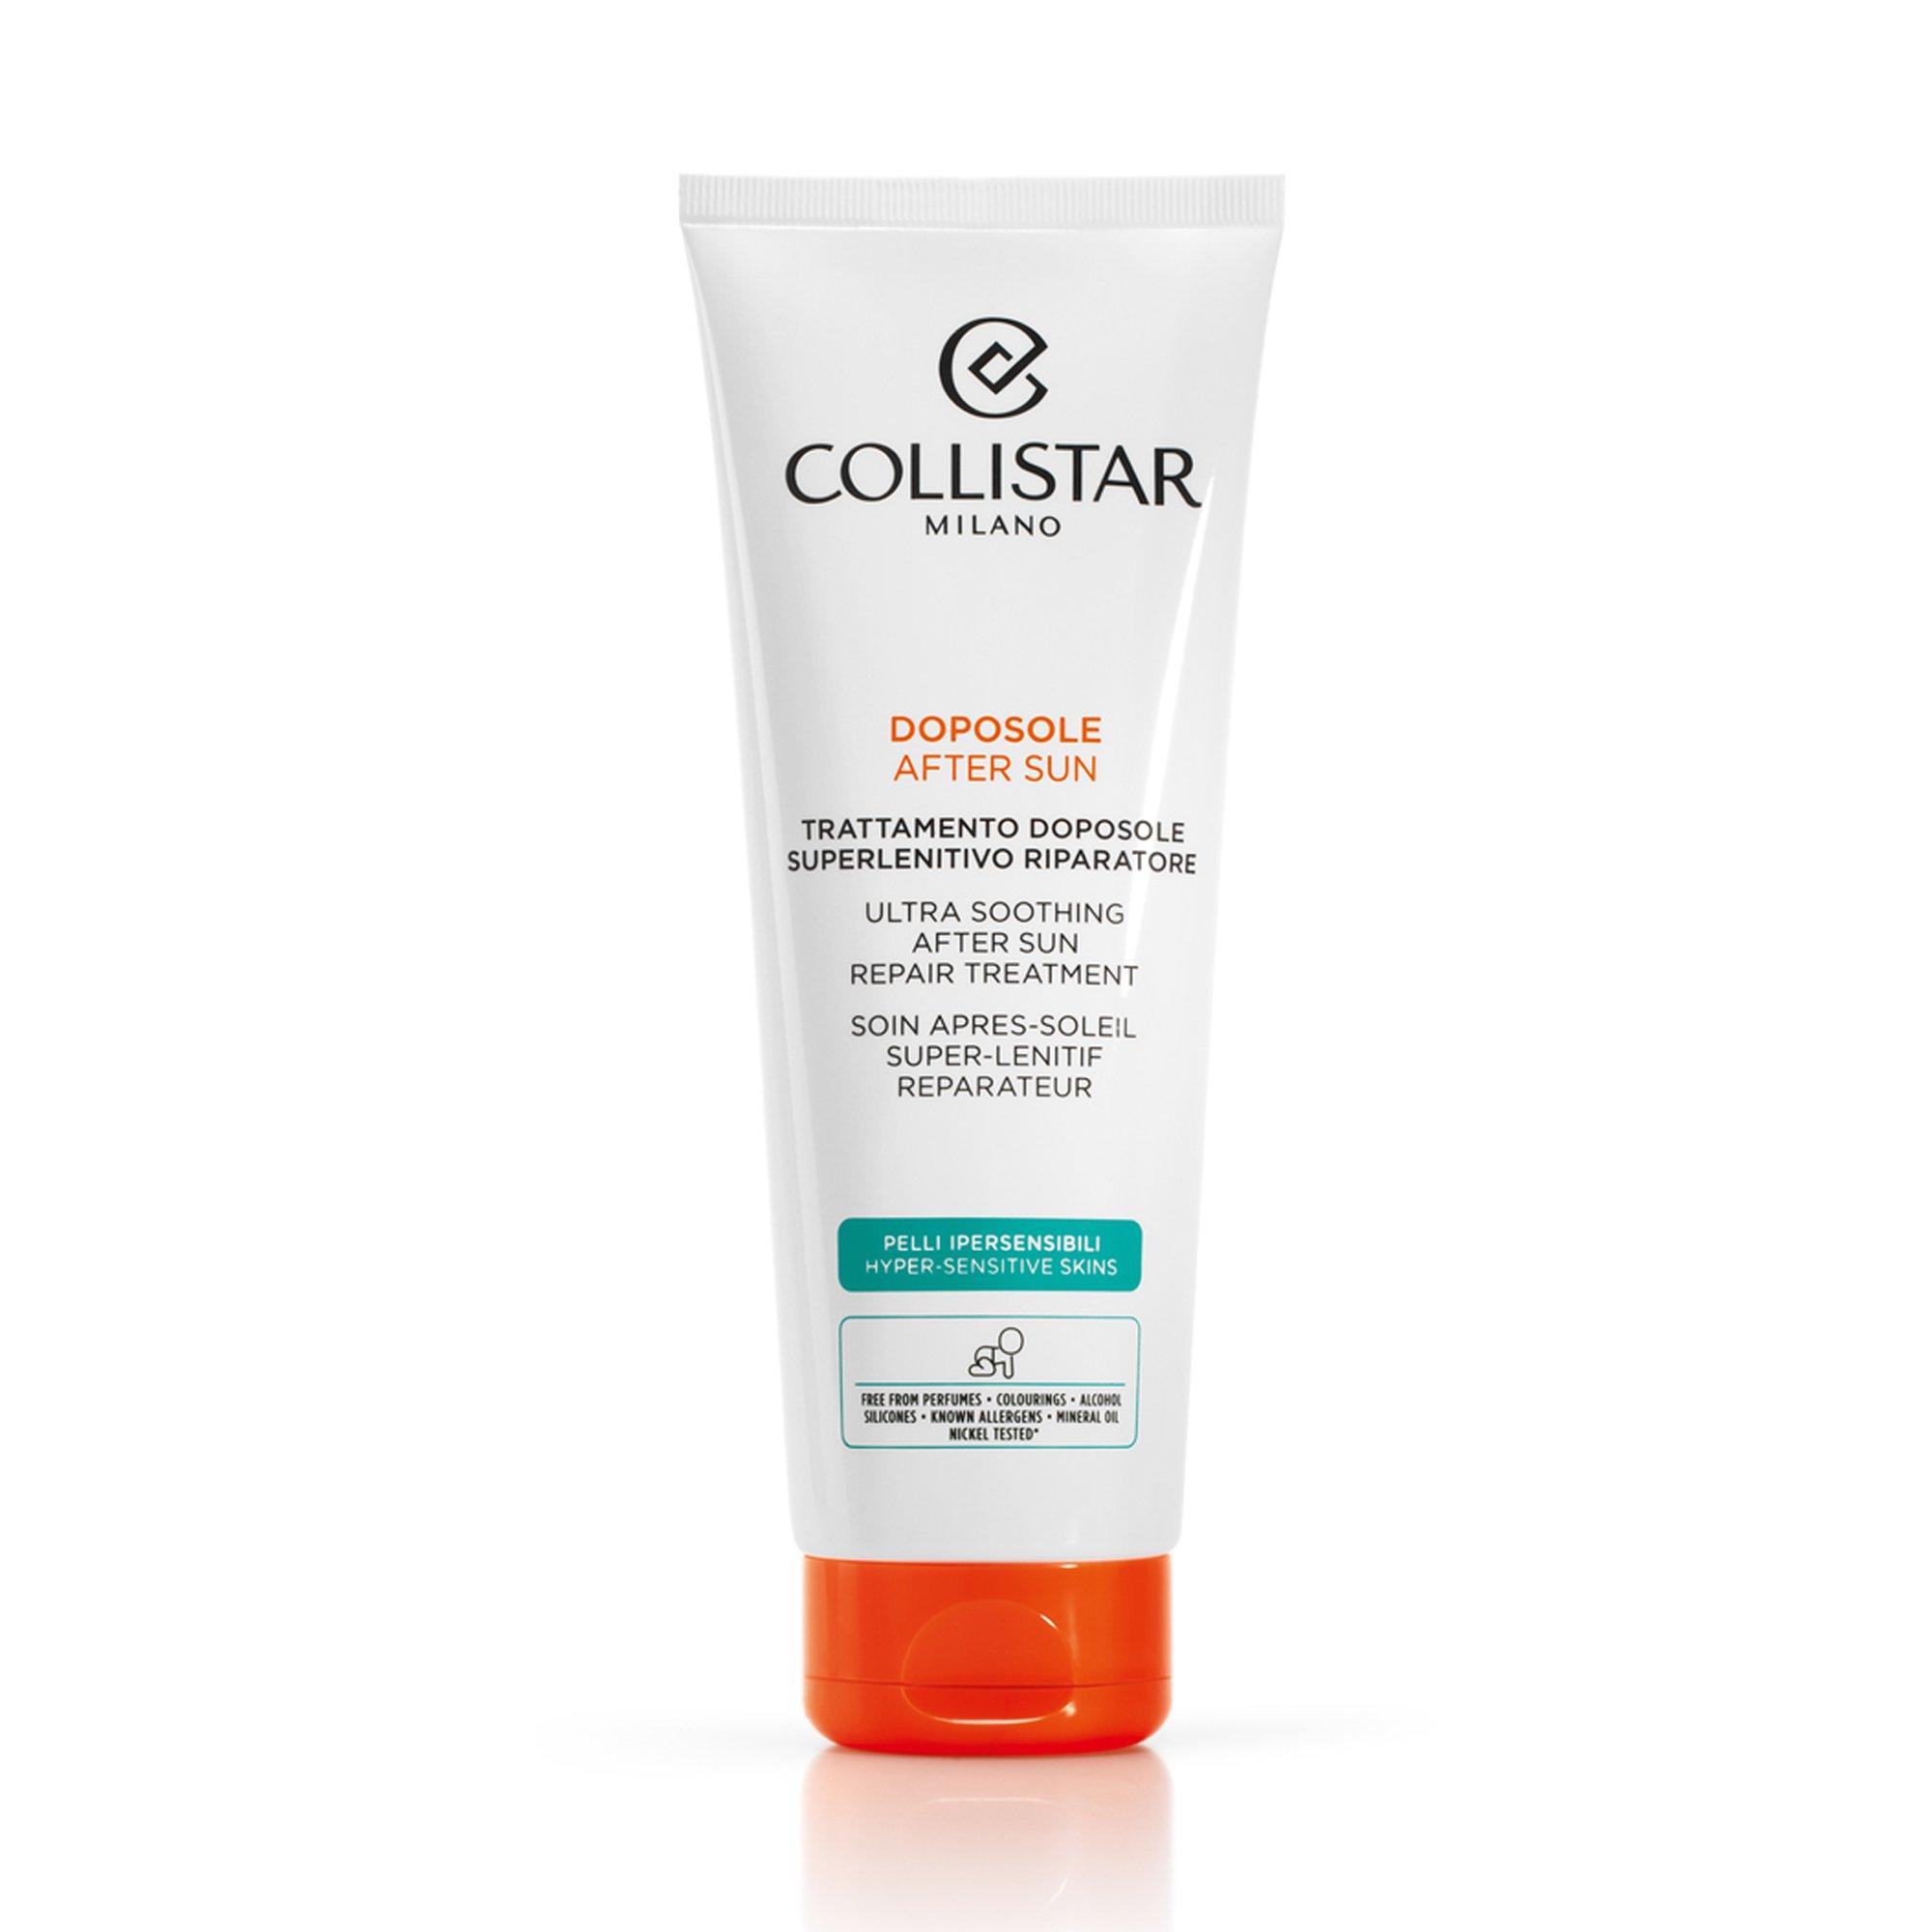 Image of COLLISTAR Ultra Soothing After Sun Repair Treatment